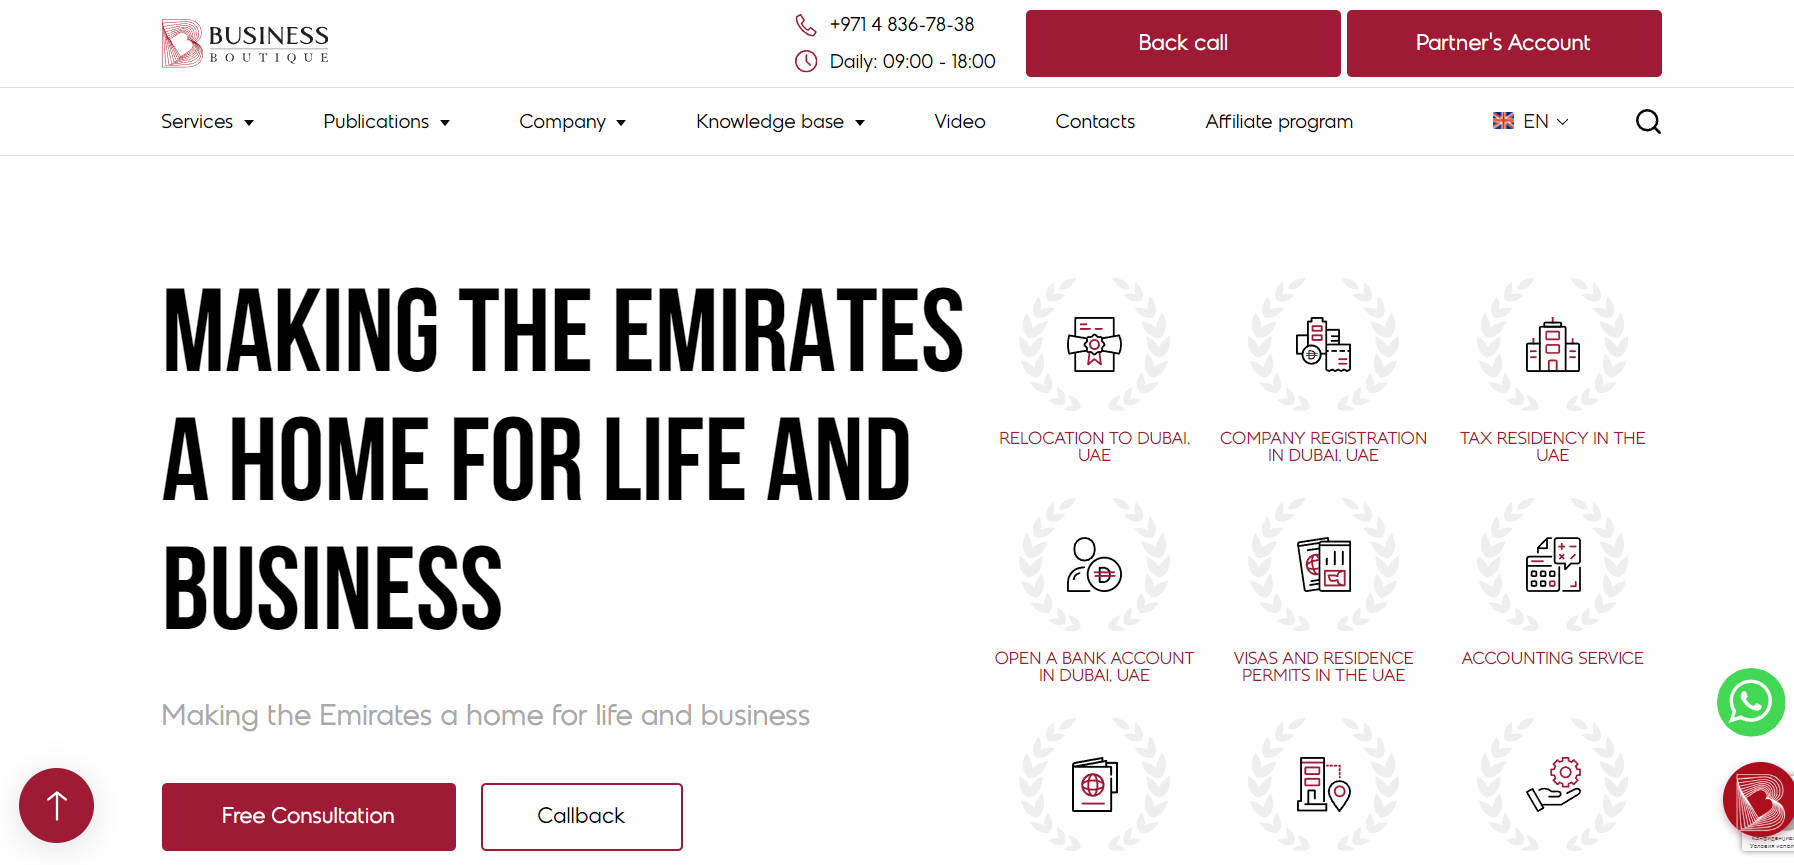 How to Avoid Mistakes When Registering a Company in Dubai: Lessons from Working with Business Boutique